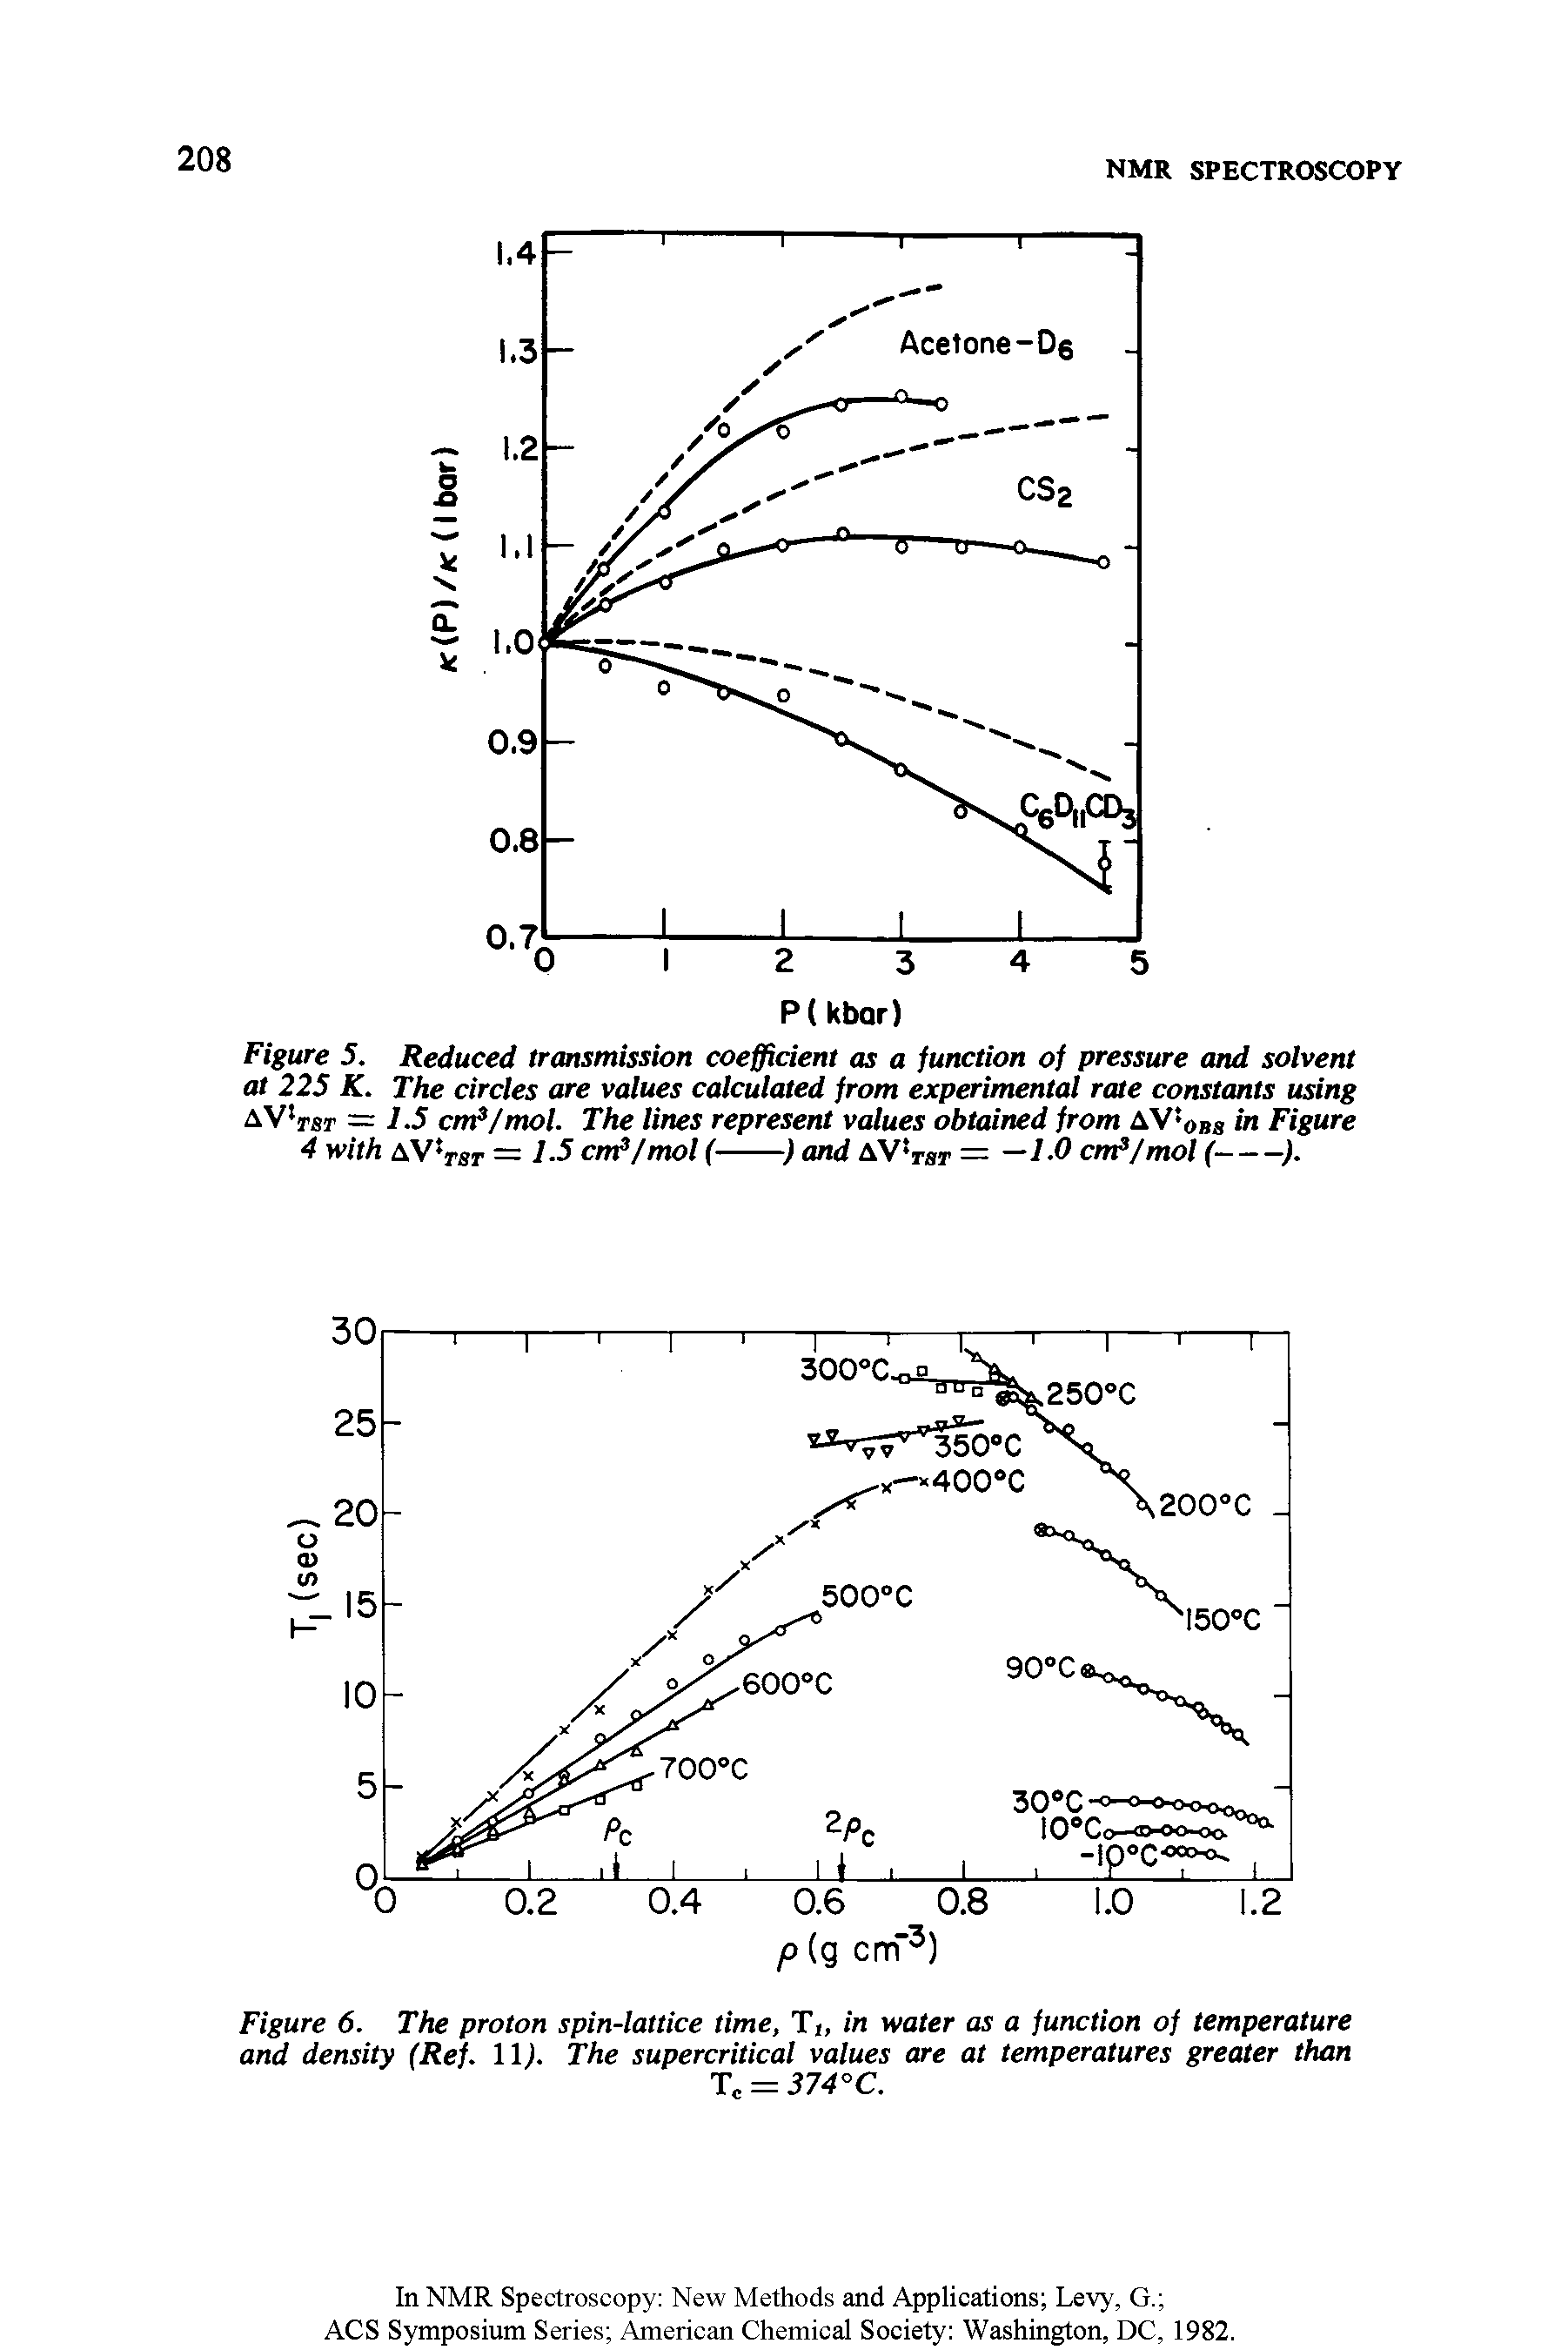 Figure 6. The proton spin-lattice time, Tt, in water as a function of temperature and density (Ref. 11. The supercritical values are at temperatures greater than...